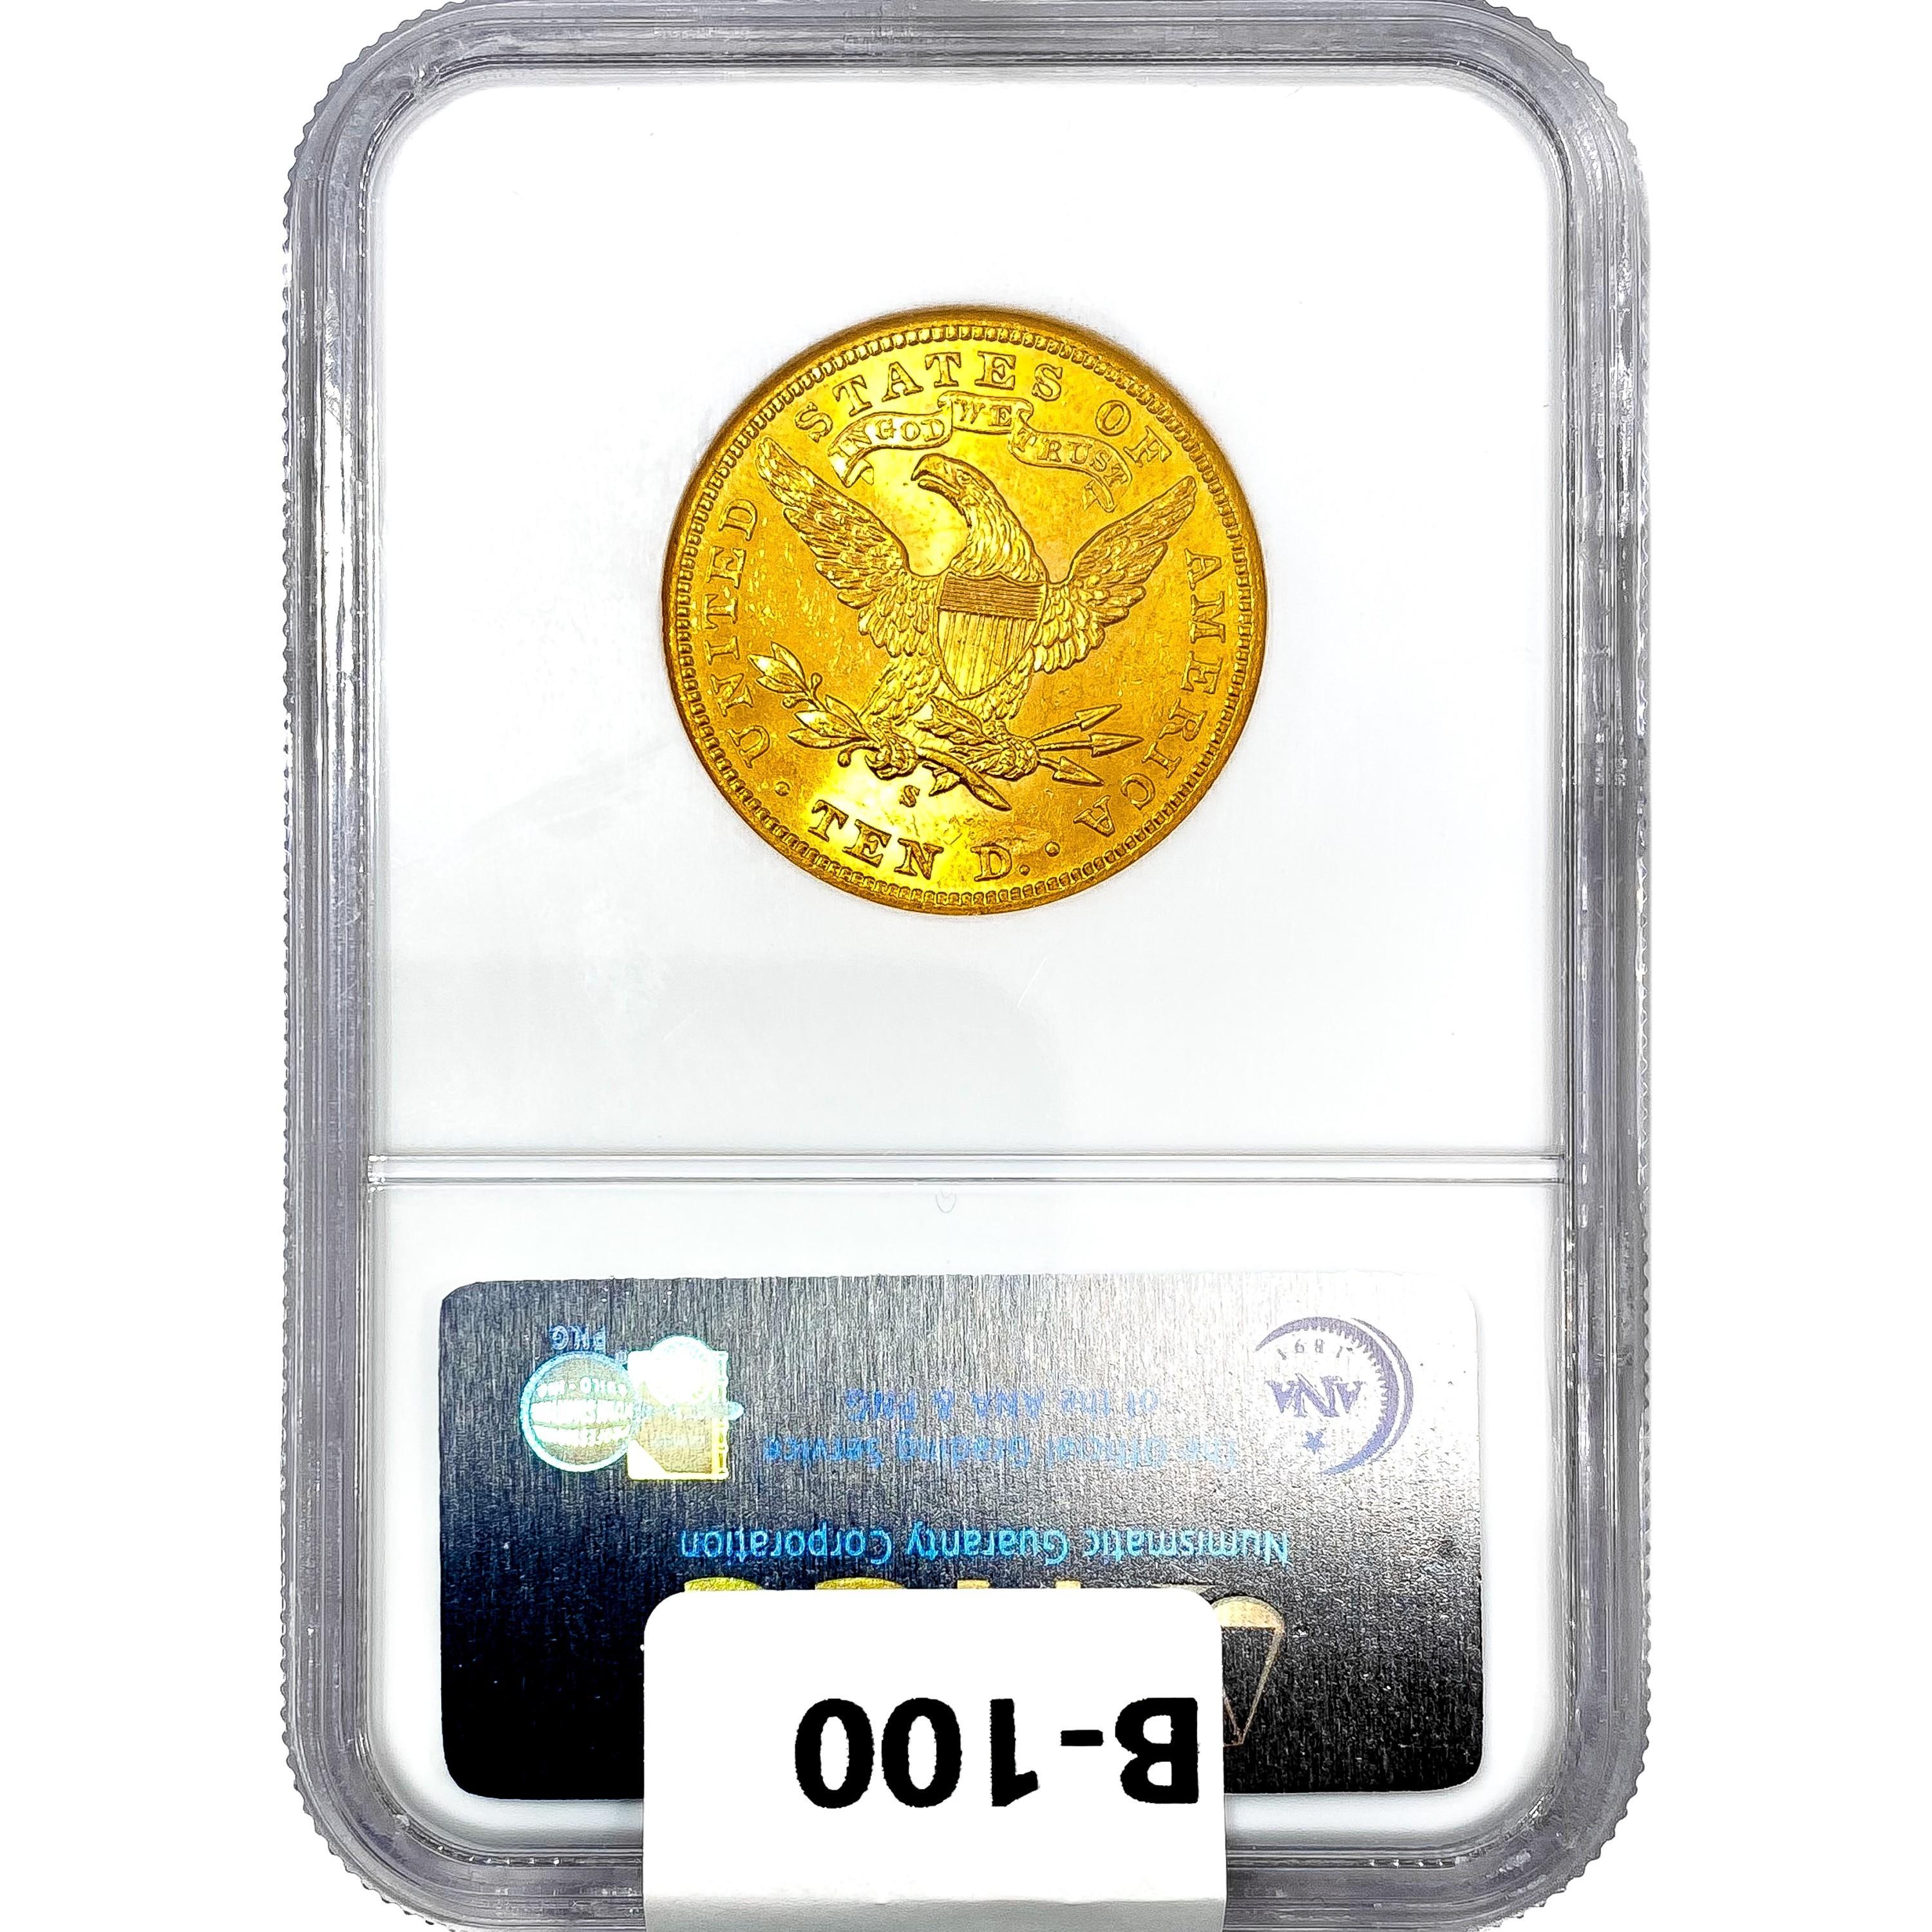 1901-S $10 Gold Eagle NGC MS64